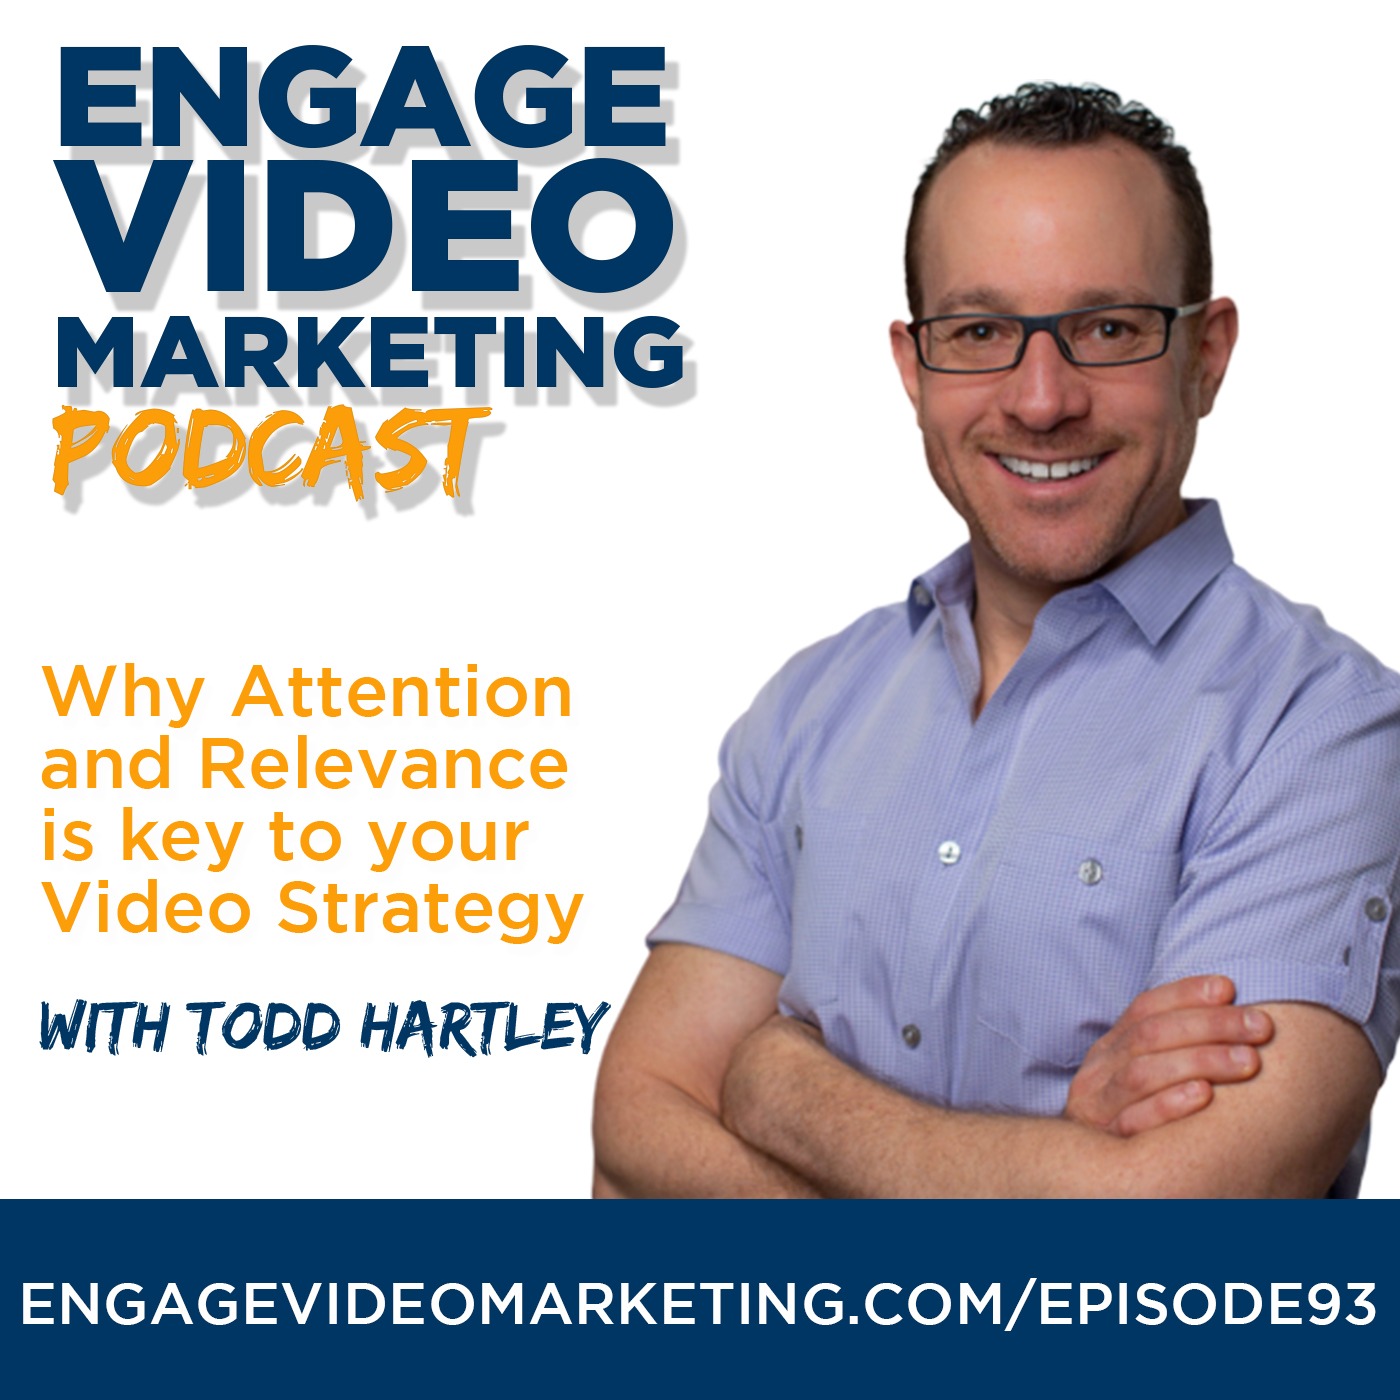 Why Attention and Relevance is key to your Video Strategy with Todd Hartley